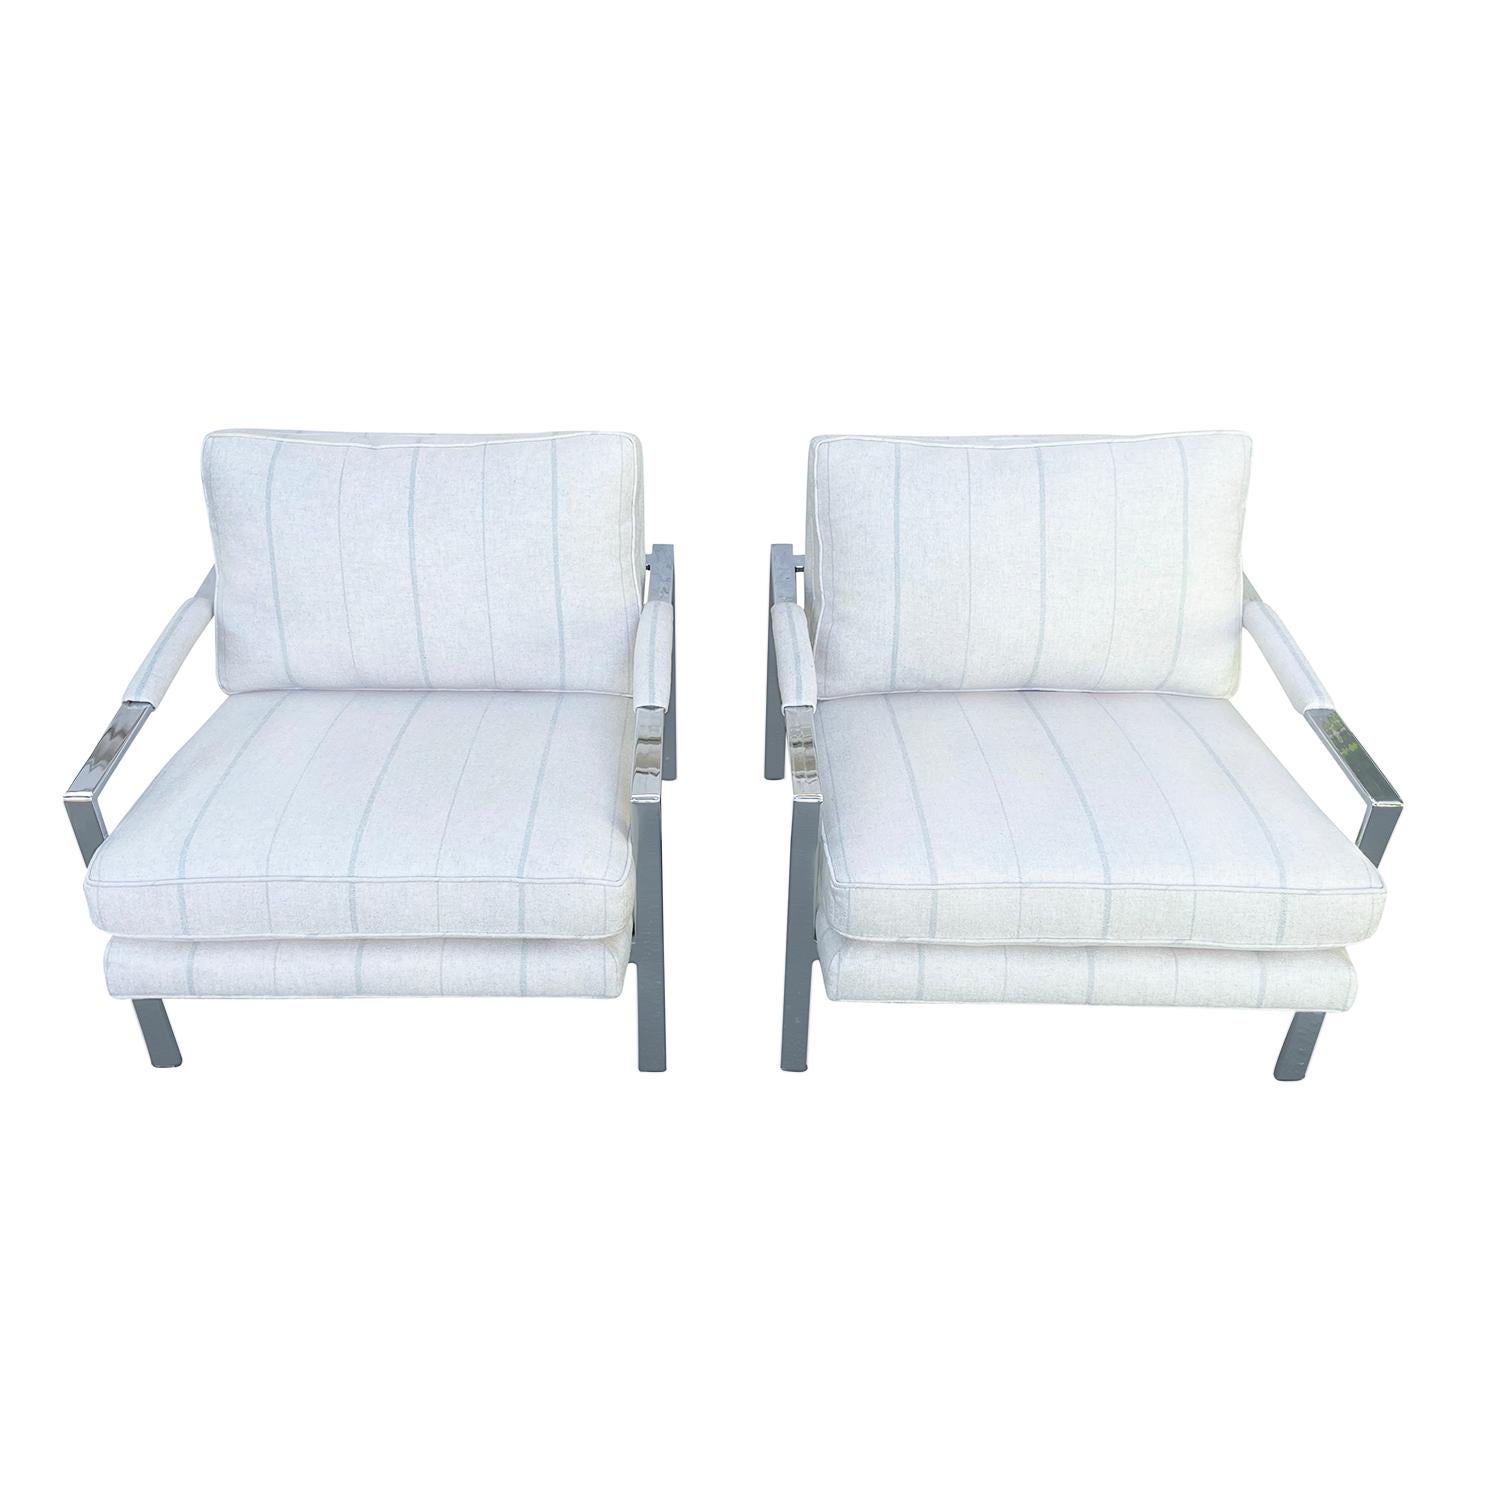 A silver, vintage Mid-Century Modern American pair of lounge chairs made of hand crafted chrome, designed by Milo Baughman and produced by TC Thayer Coggin, Inc., in good condition. The seat, backrest of the plated steel armchairs are inclinated